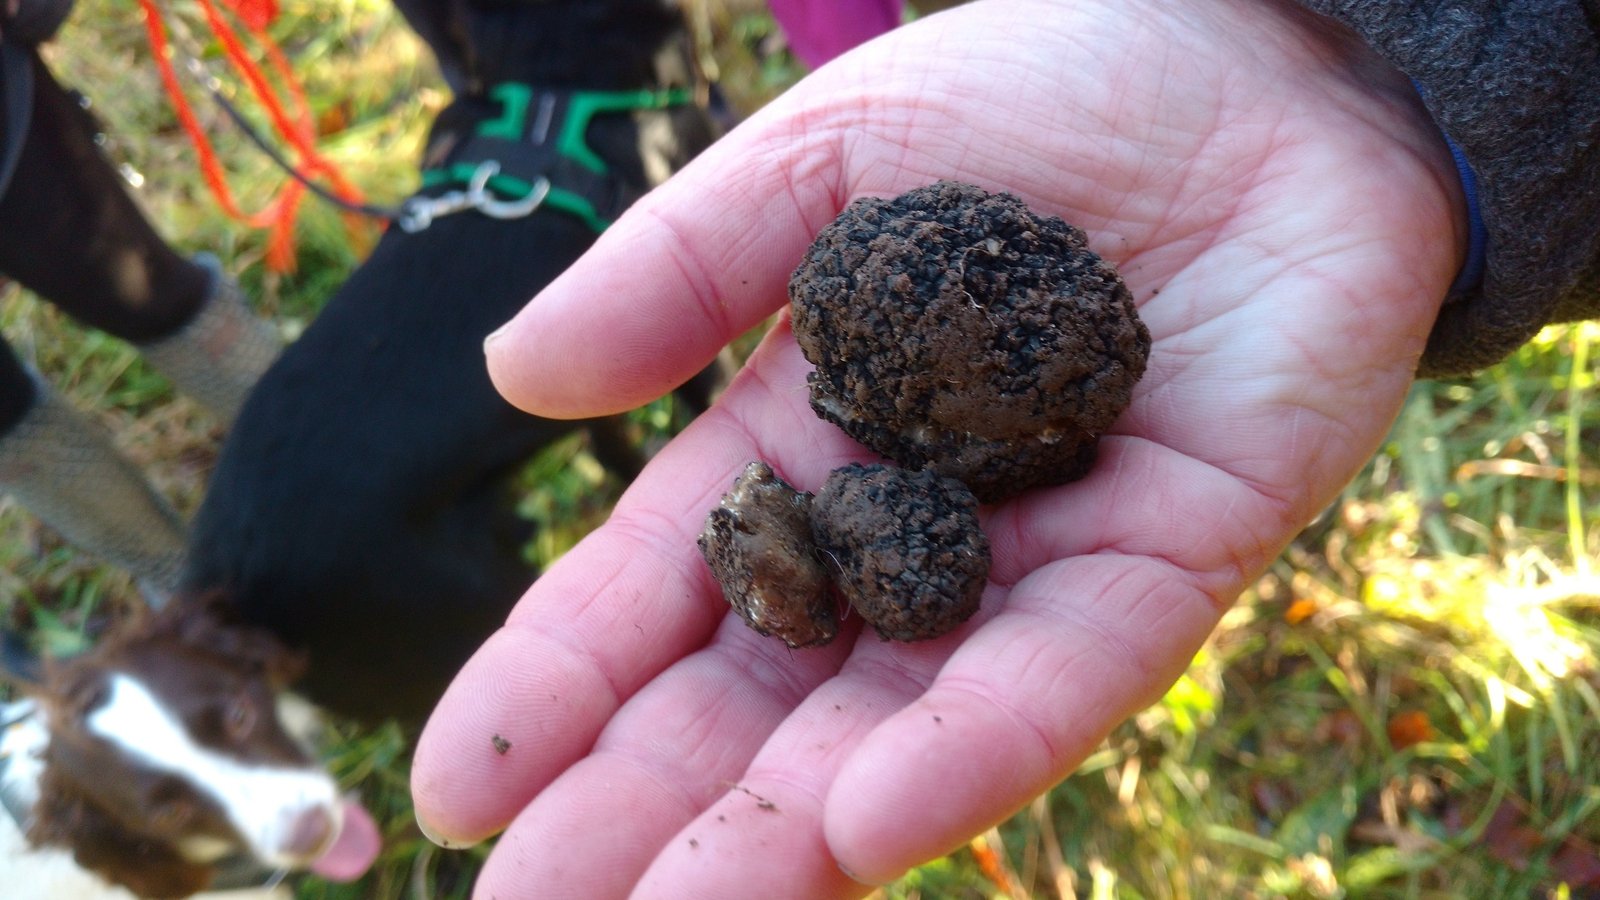 Black truffles have been cultivated in Ireland in recent weeks, in what is believed to be the first time they have been successfully grown and cultiva